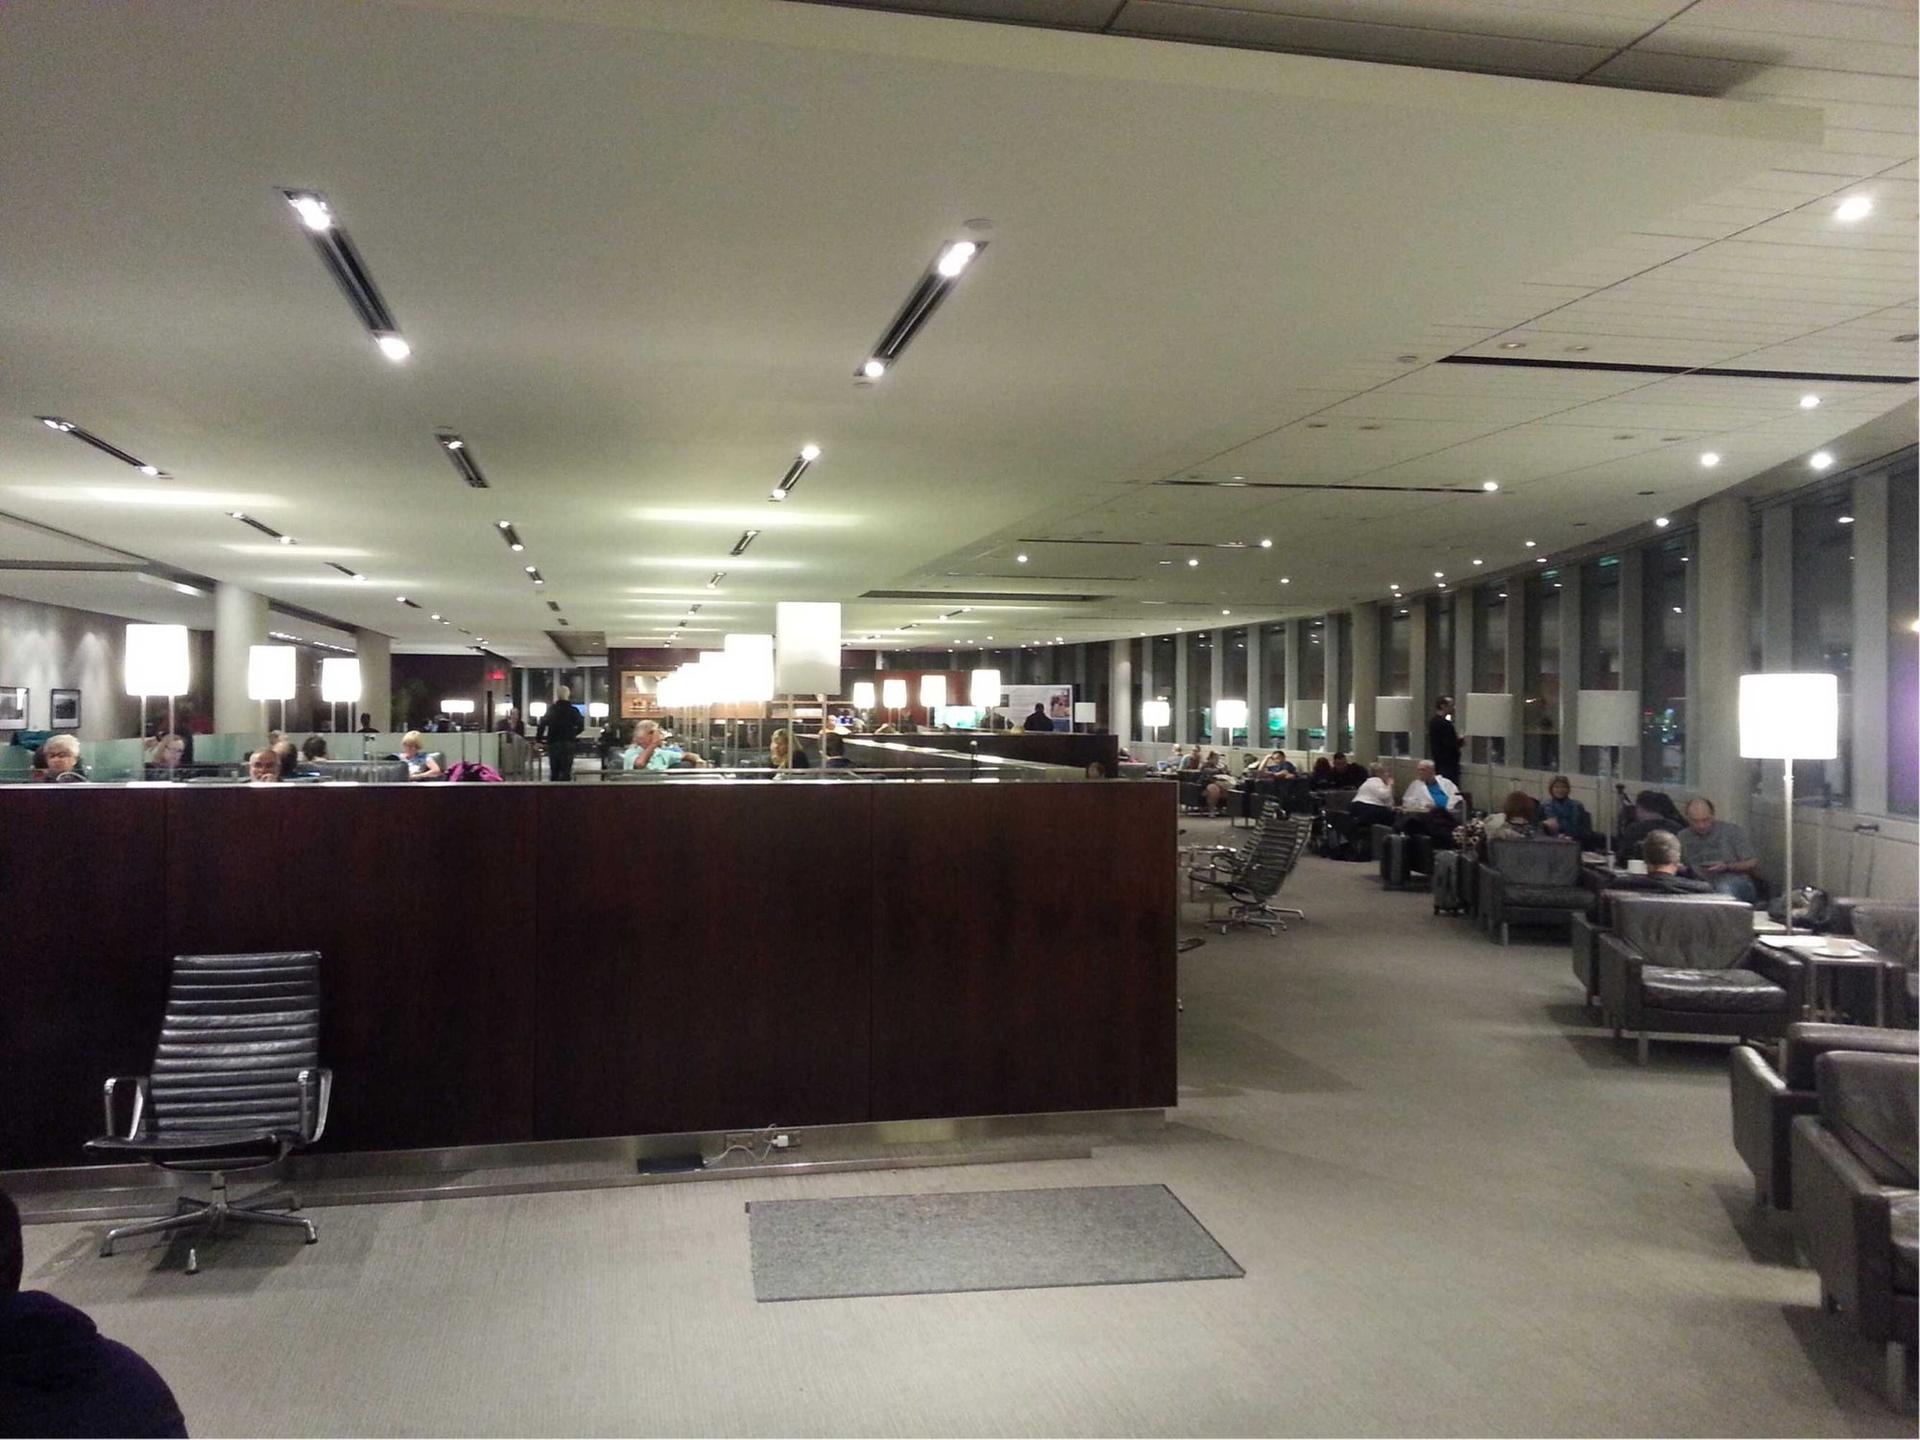 Air Canada Maple Leaf Lounge image 2 of 21